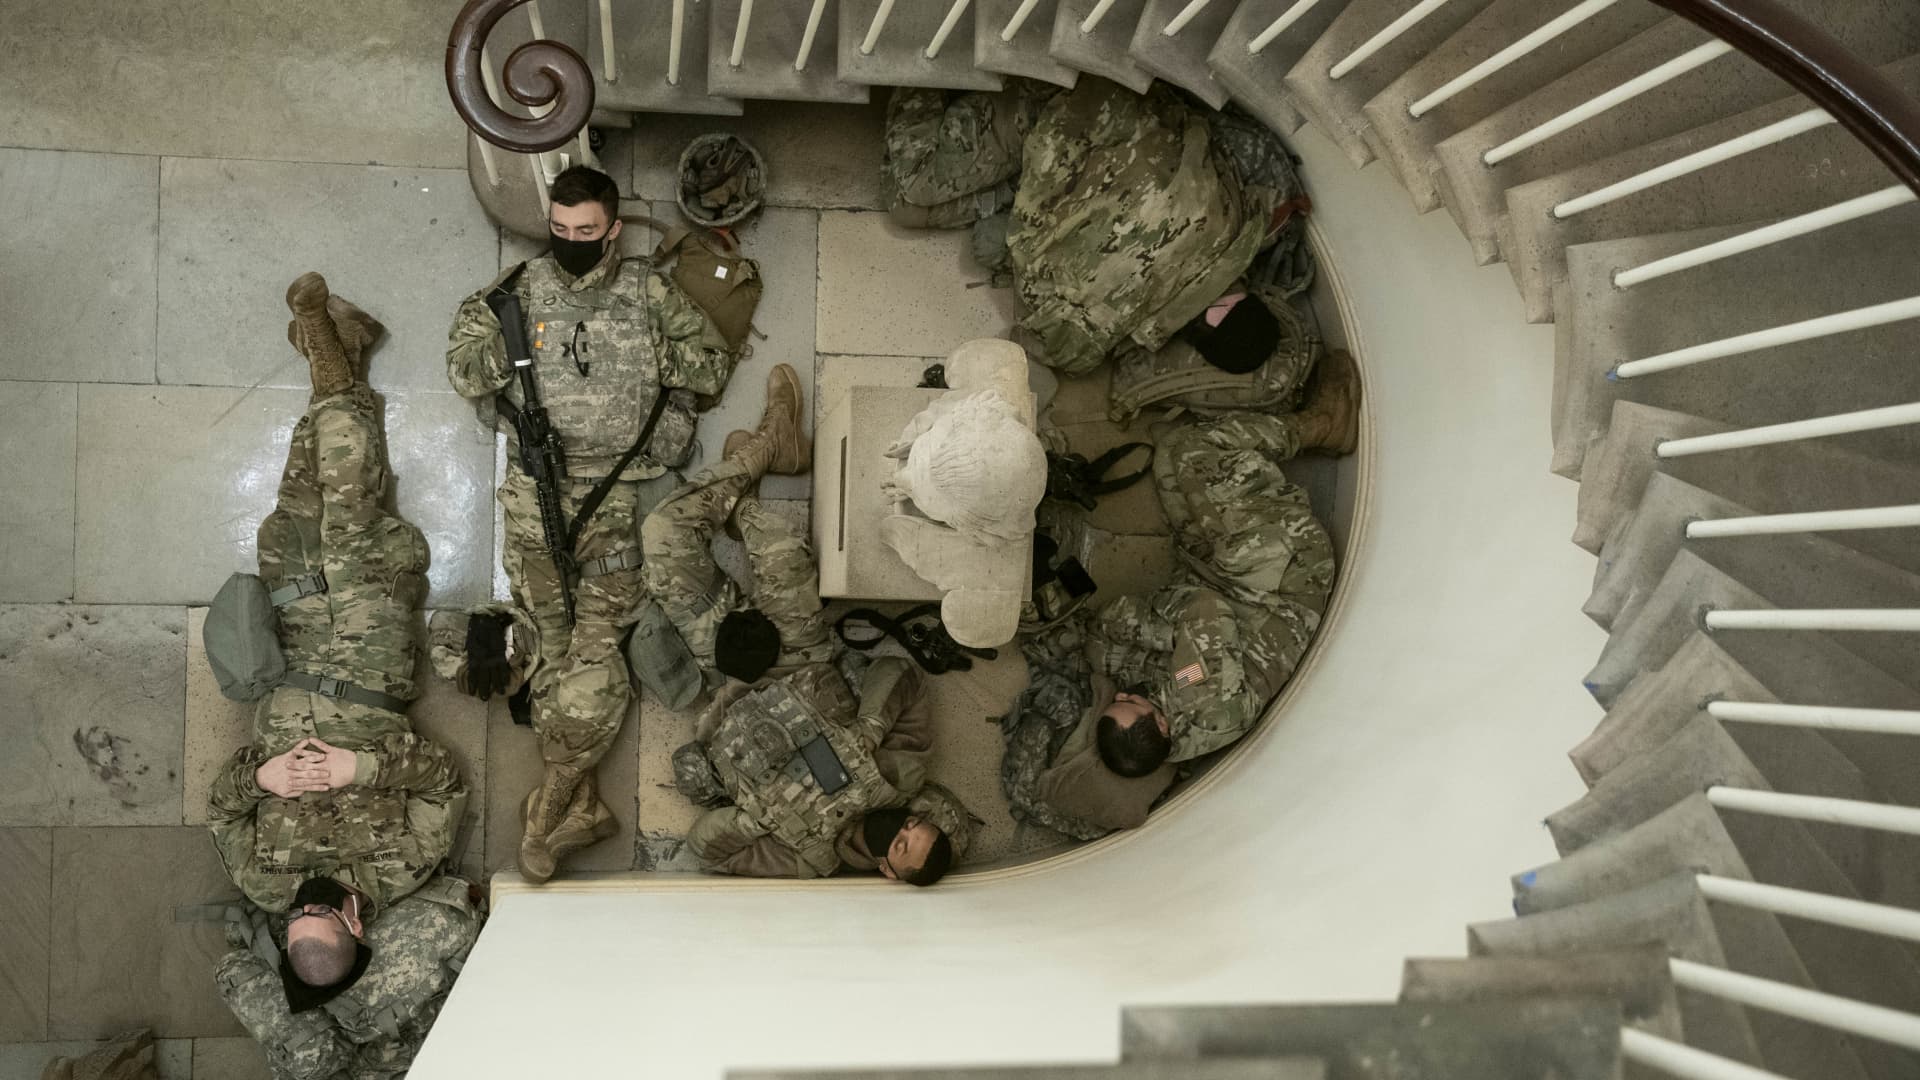 Members of the National Guard rest in a hallway of the U.S. Capitol building in Washington, D.C., U.S., on Wednesday, Jan. 13, 2021.